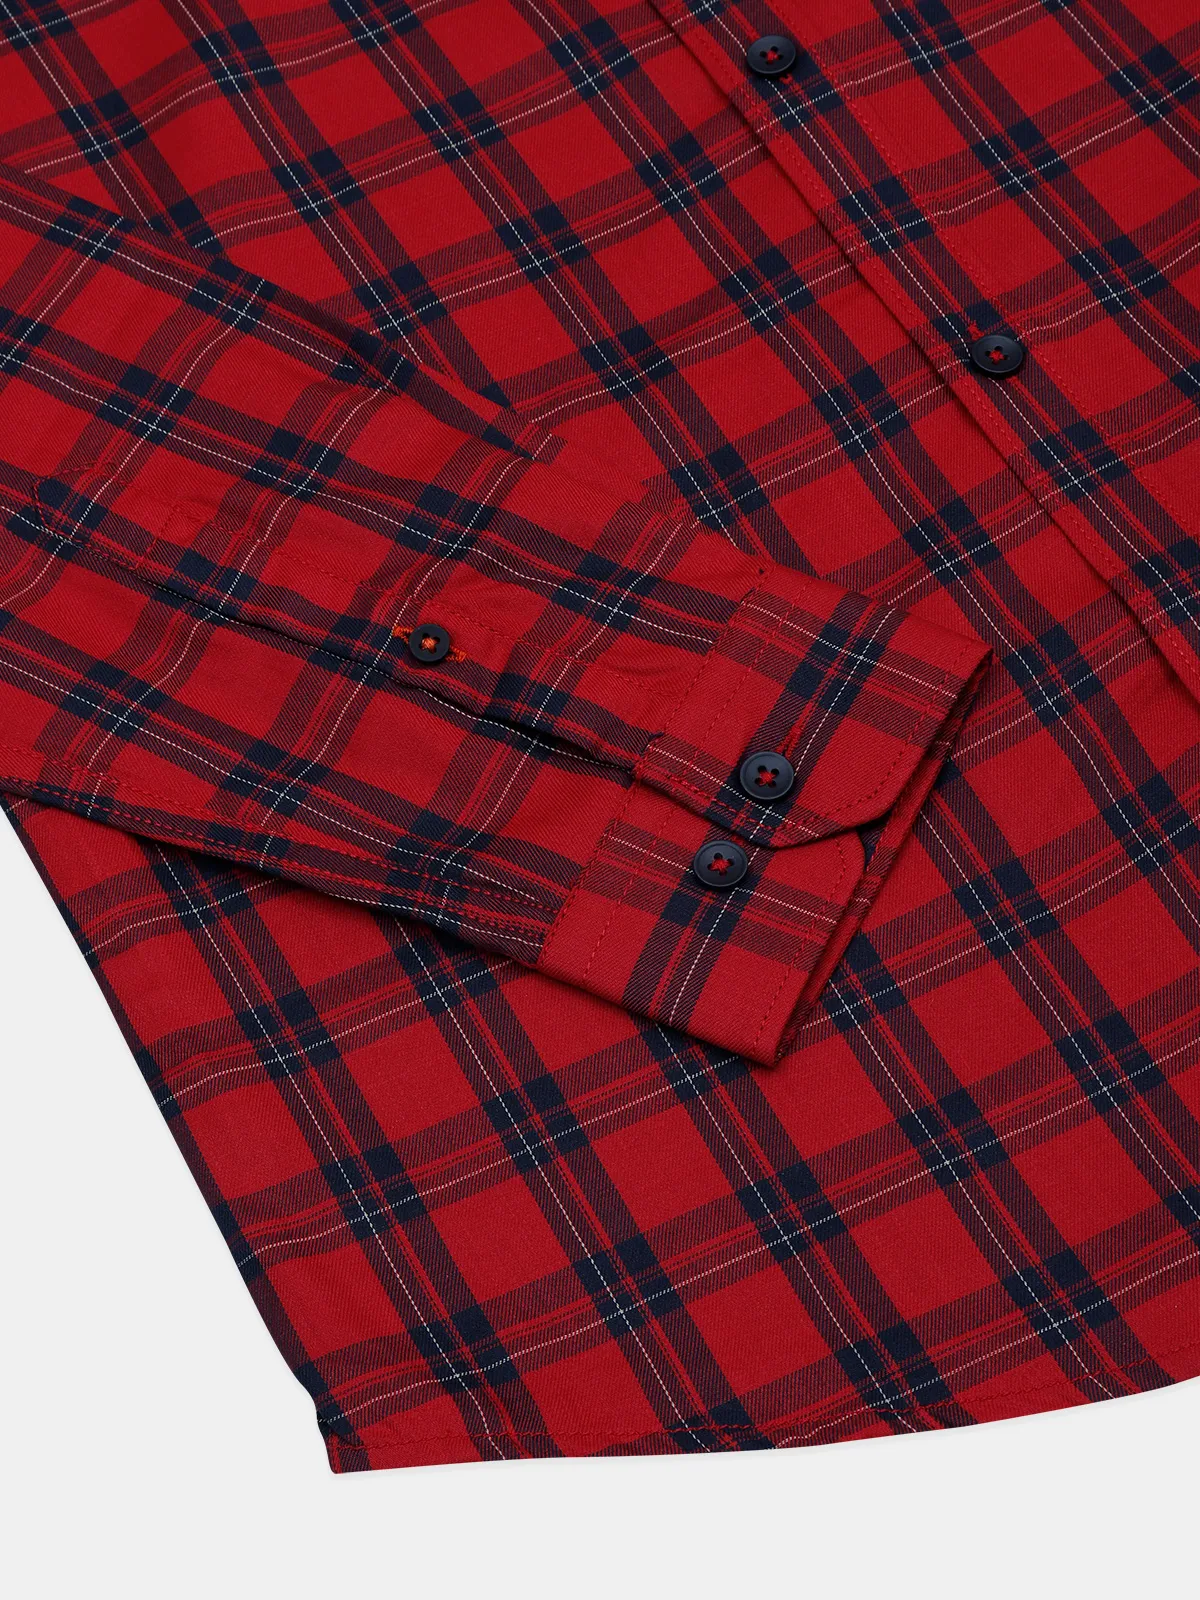 Frio cotton red checked casual shirt